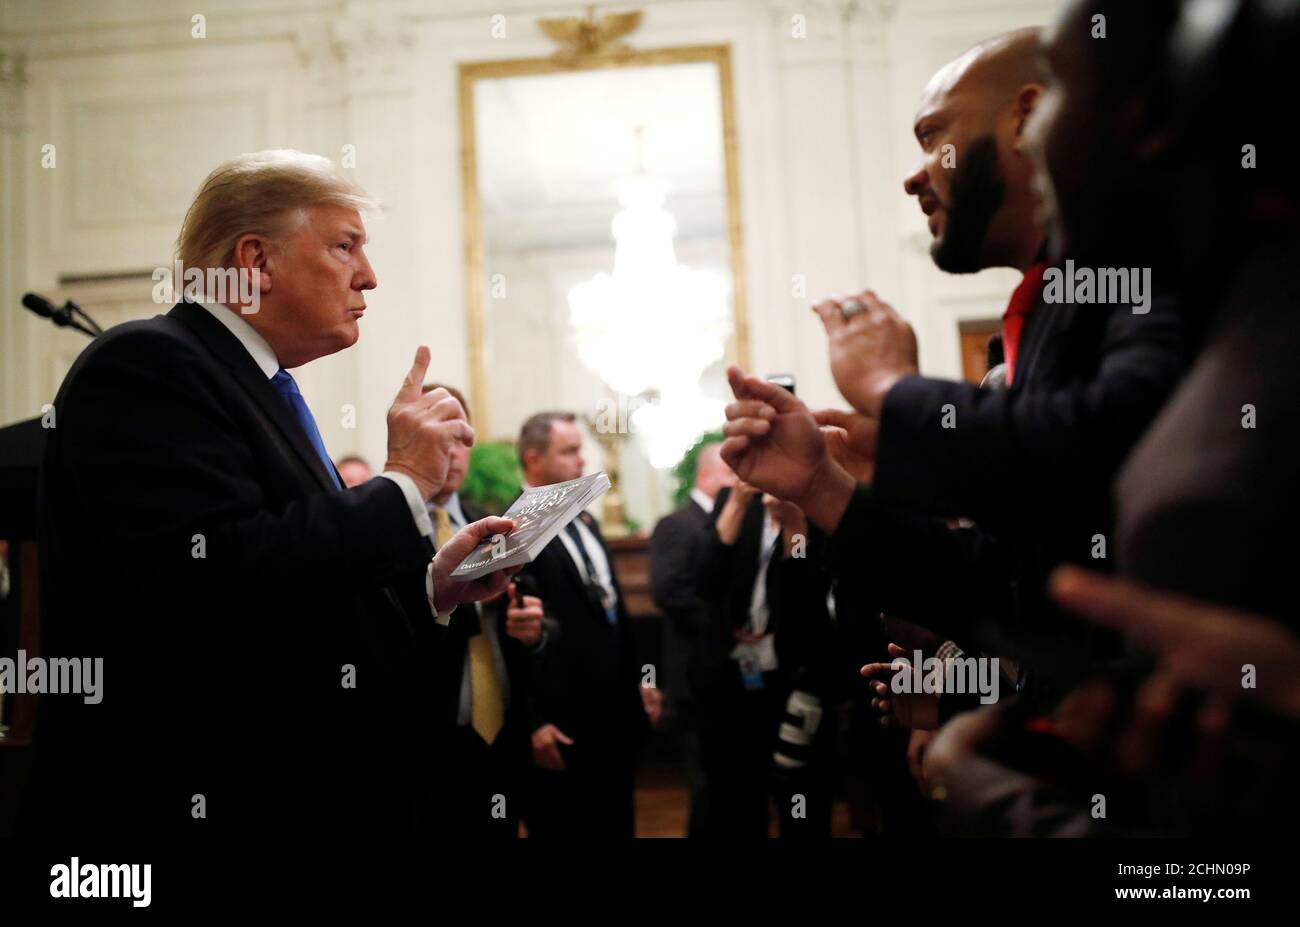 U.S. President Donald Trump speaks with author David J Harris Jr as he holds Harris's book 'Why I Couldn't Stay Silent' after the president delivered remarks at the '2018 Young Black Leadership Summit' in the East Room of the White House in Washington, U.S., October 26, 2018. REUTERS/Carlos Barria Stock Photo